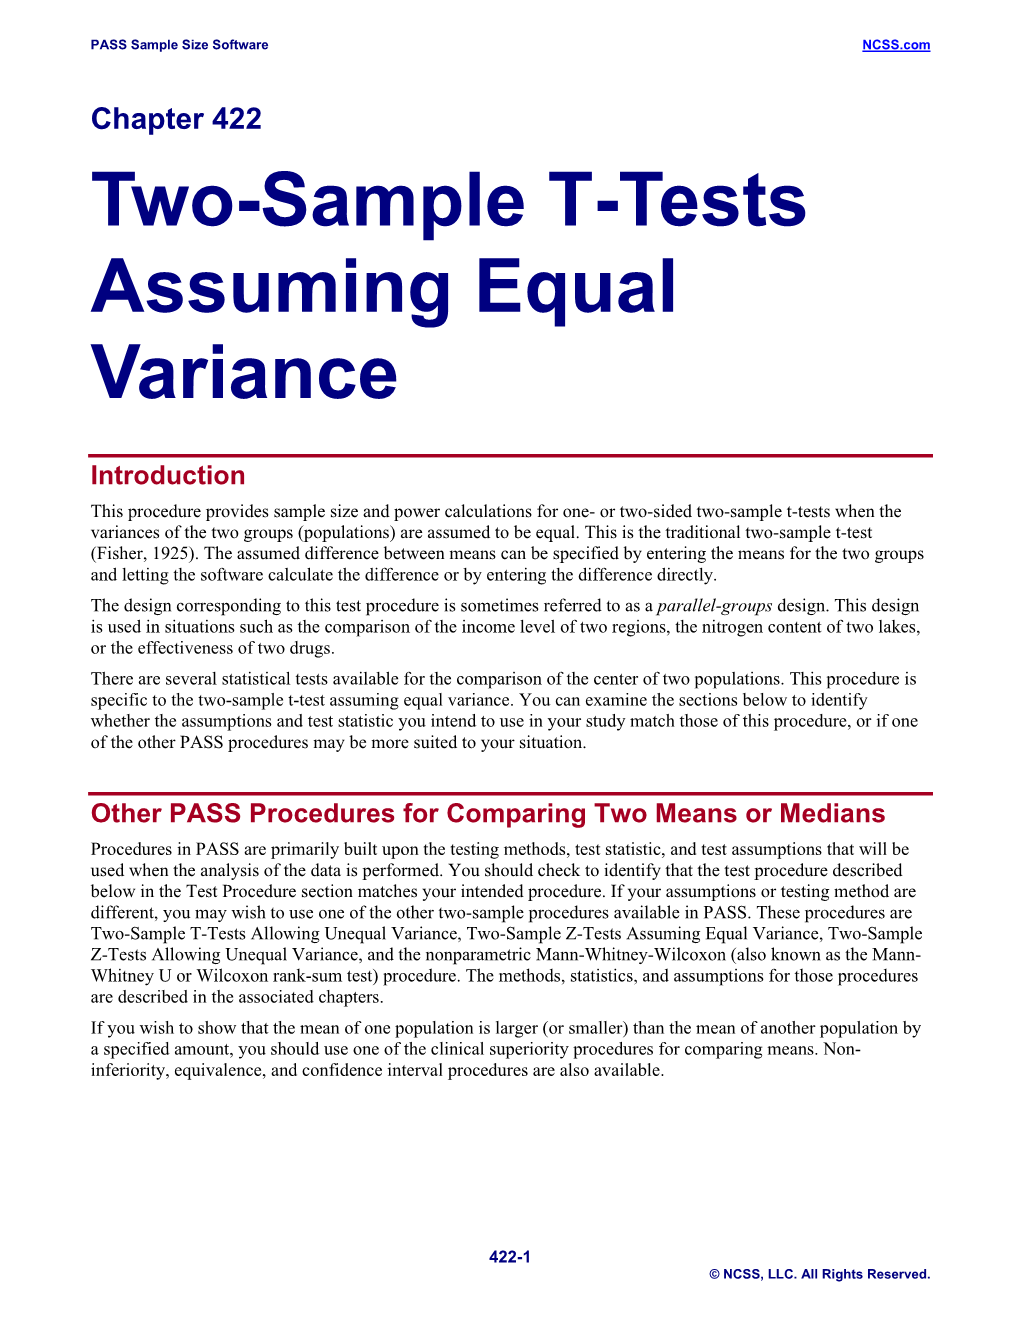 Two-Sample T-Tests Assuming Equal Variance